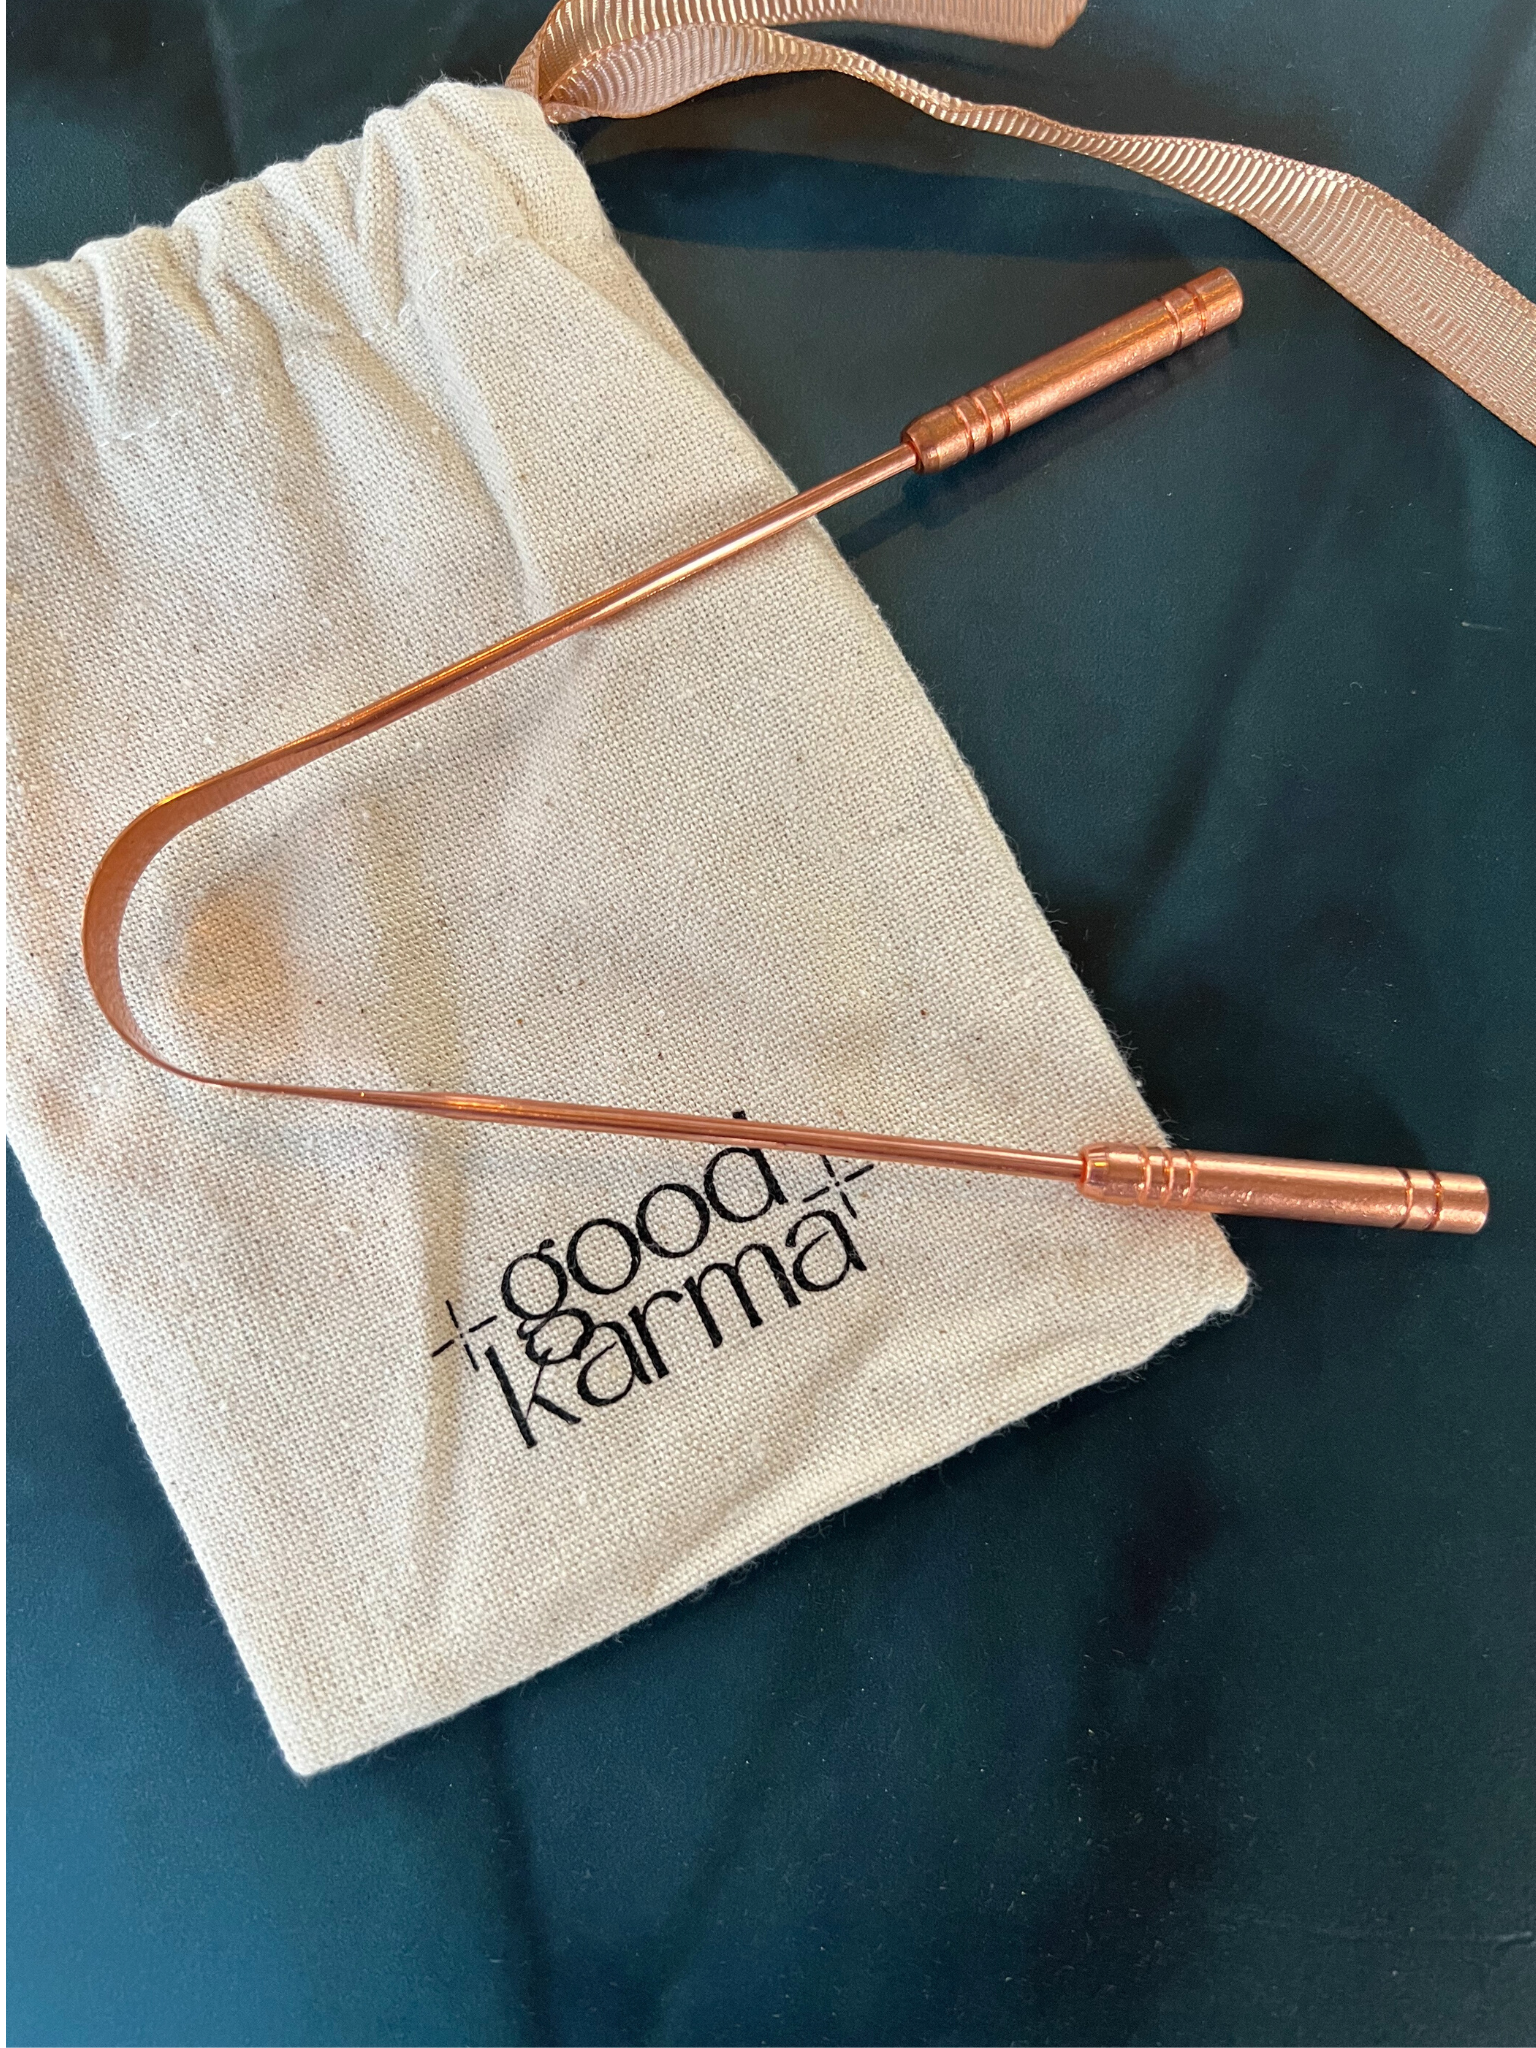 Good Karma Ayurvedic Copper Tongue Scraper Cleaner for Oral health with linen bad